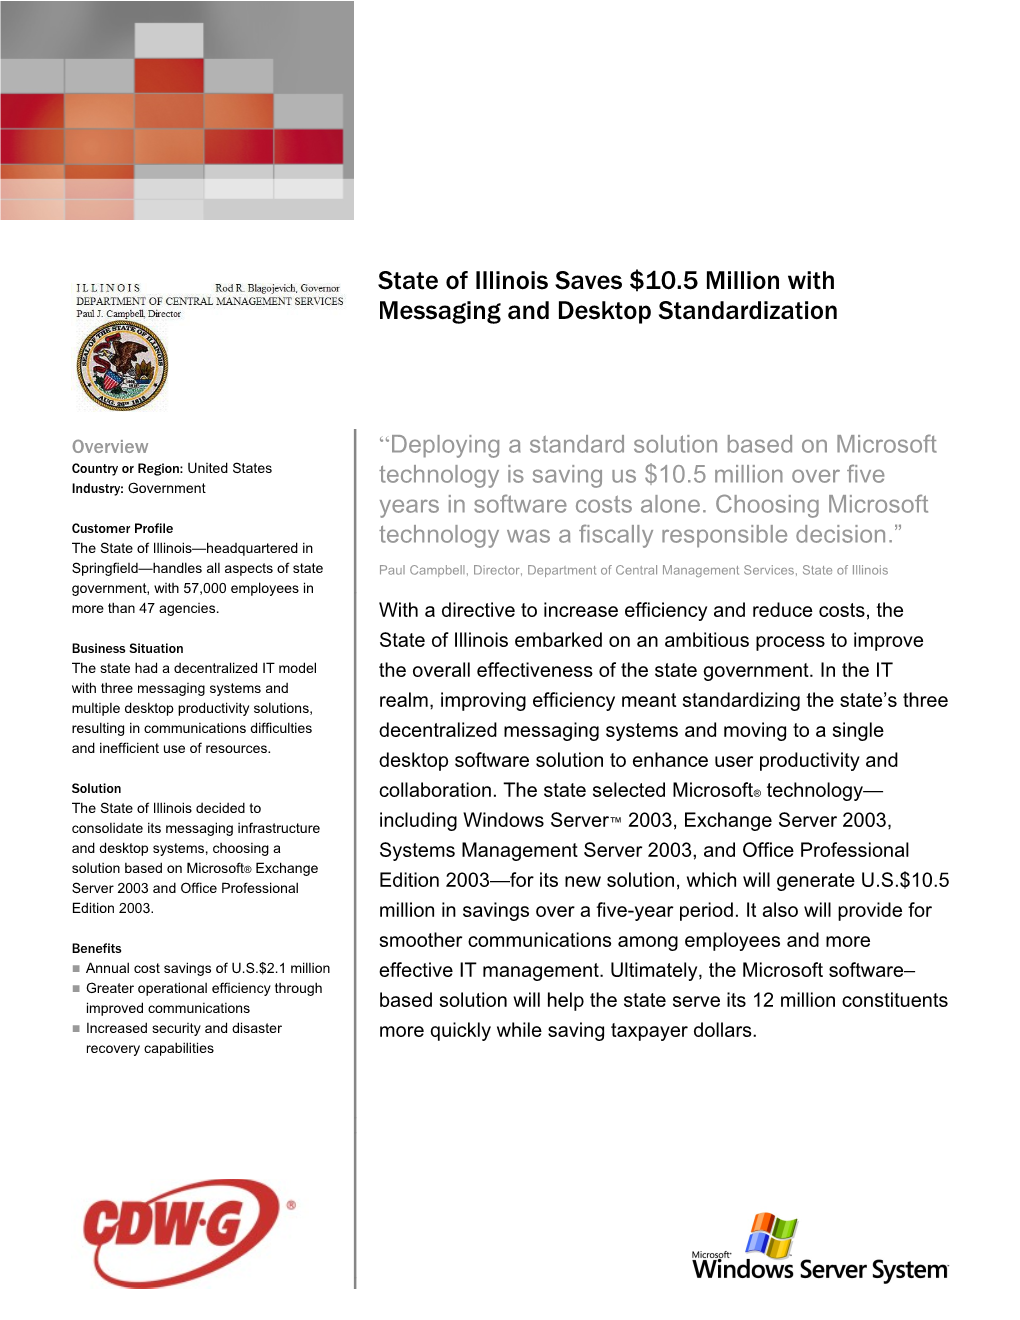 State of Illinois Saves $10.5 Million with Messaging and Desktop Standardization